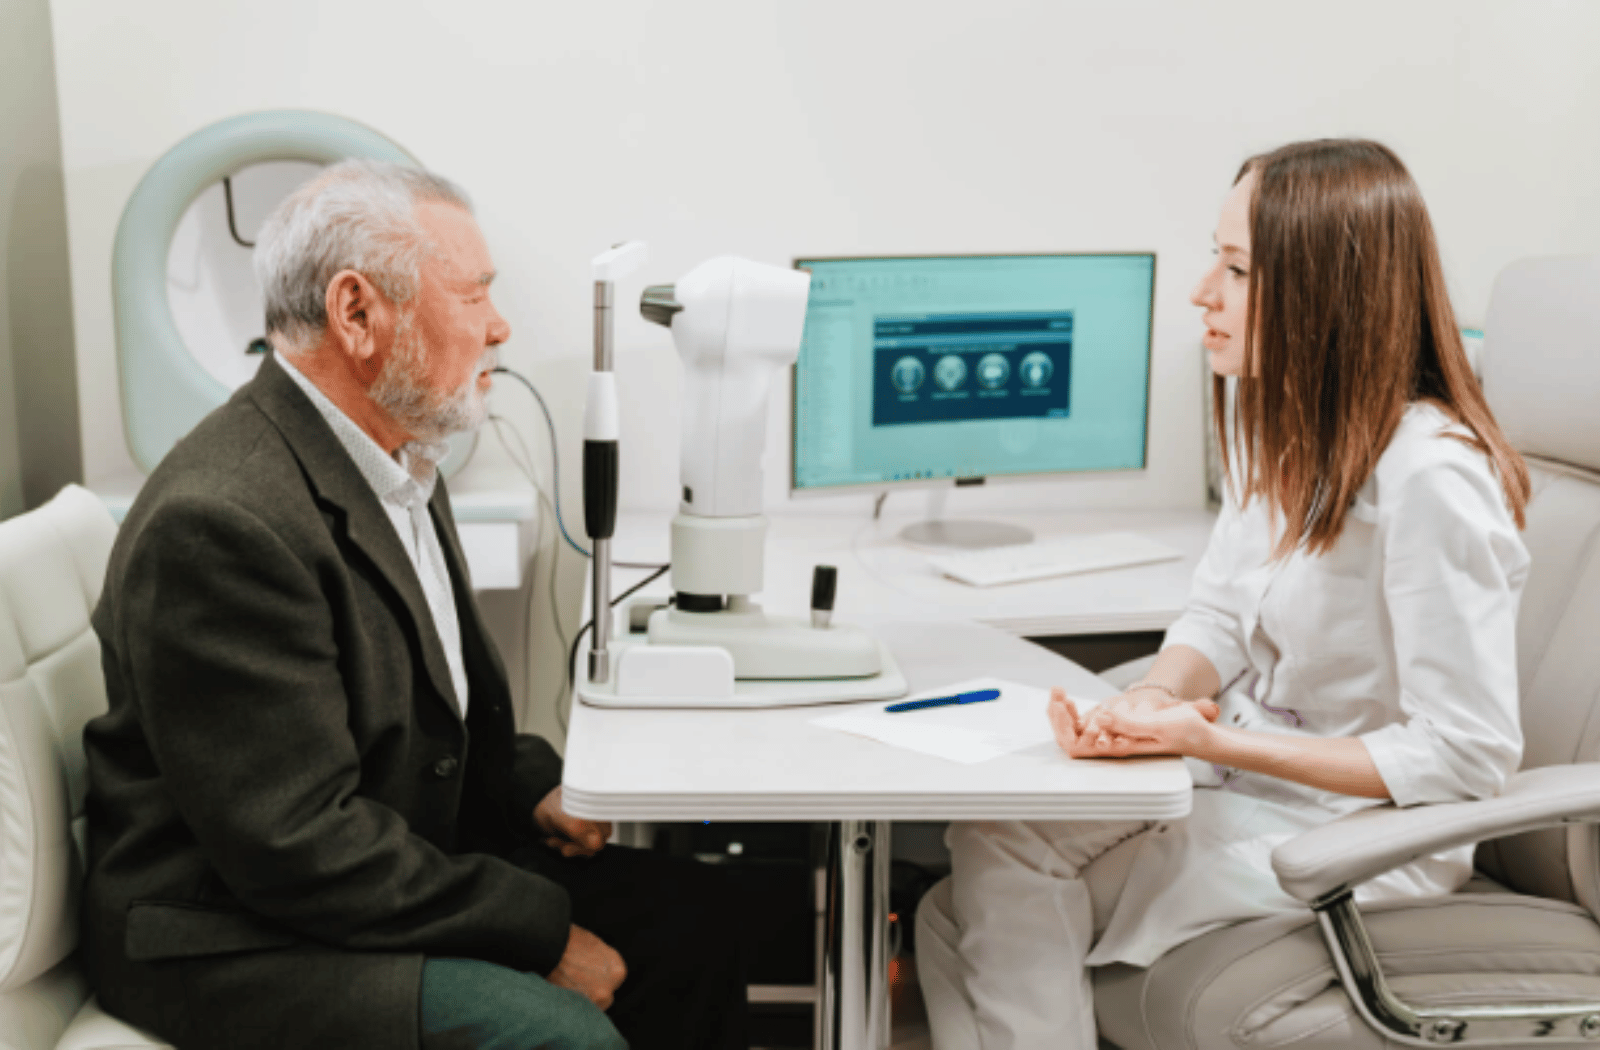 A female optician is sitting face-to-face conducting an interview during an eye examination to her senior male patient